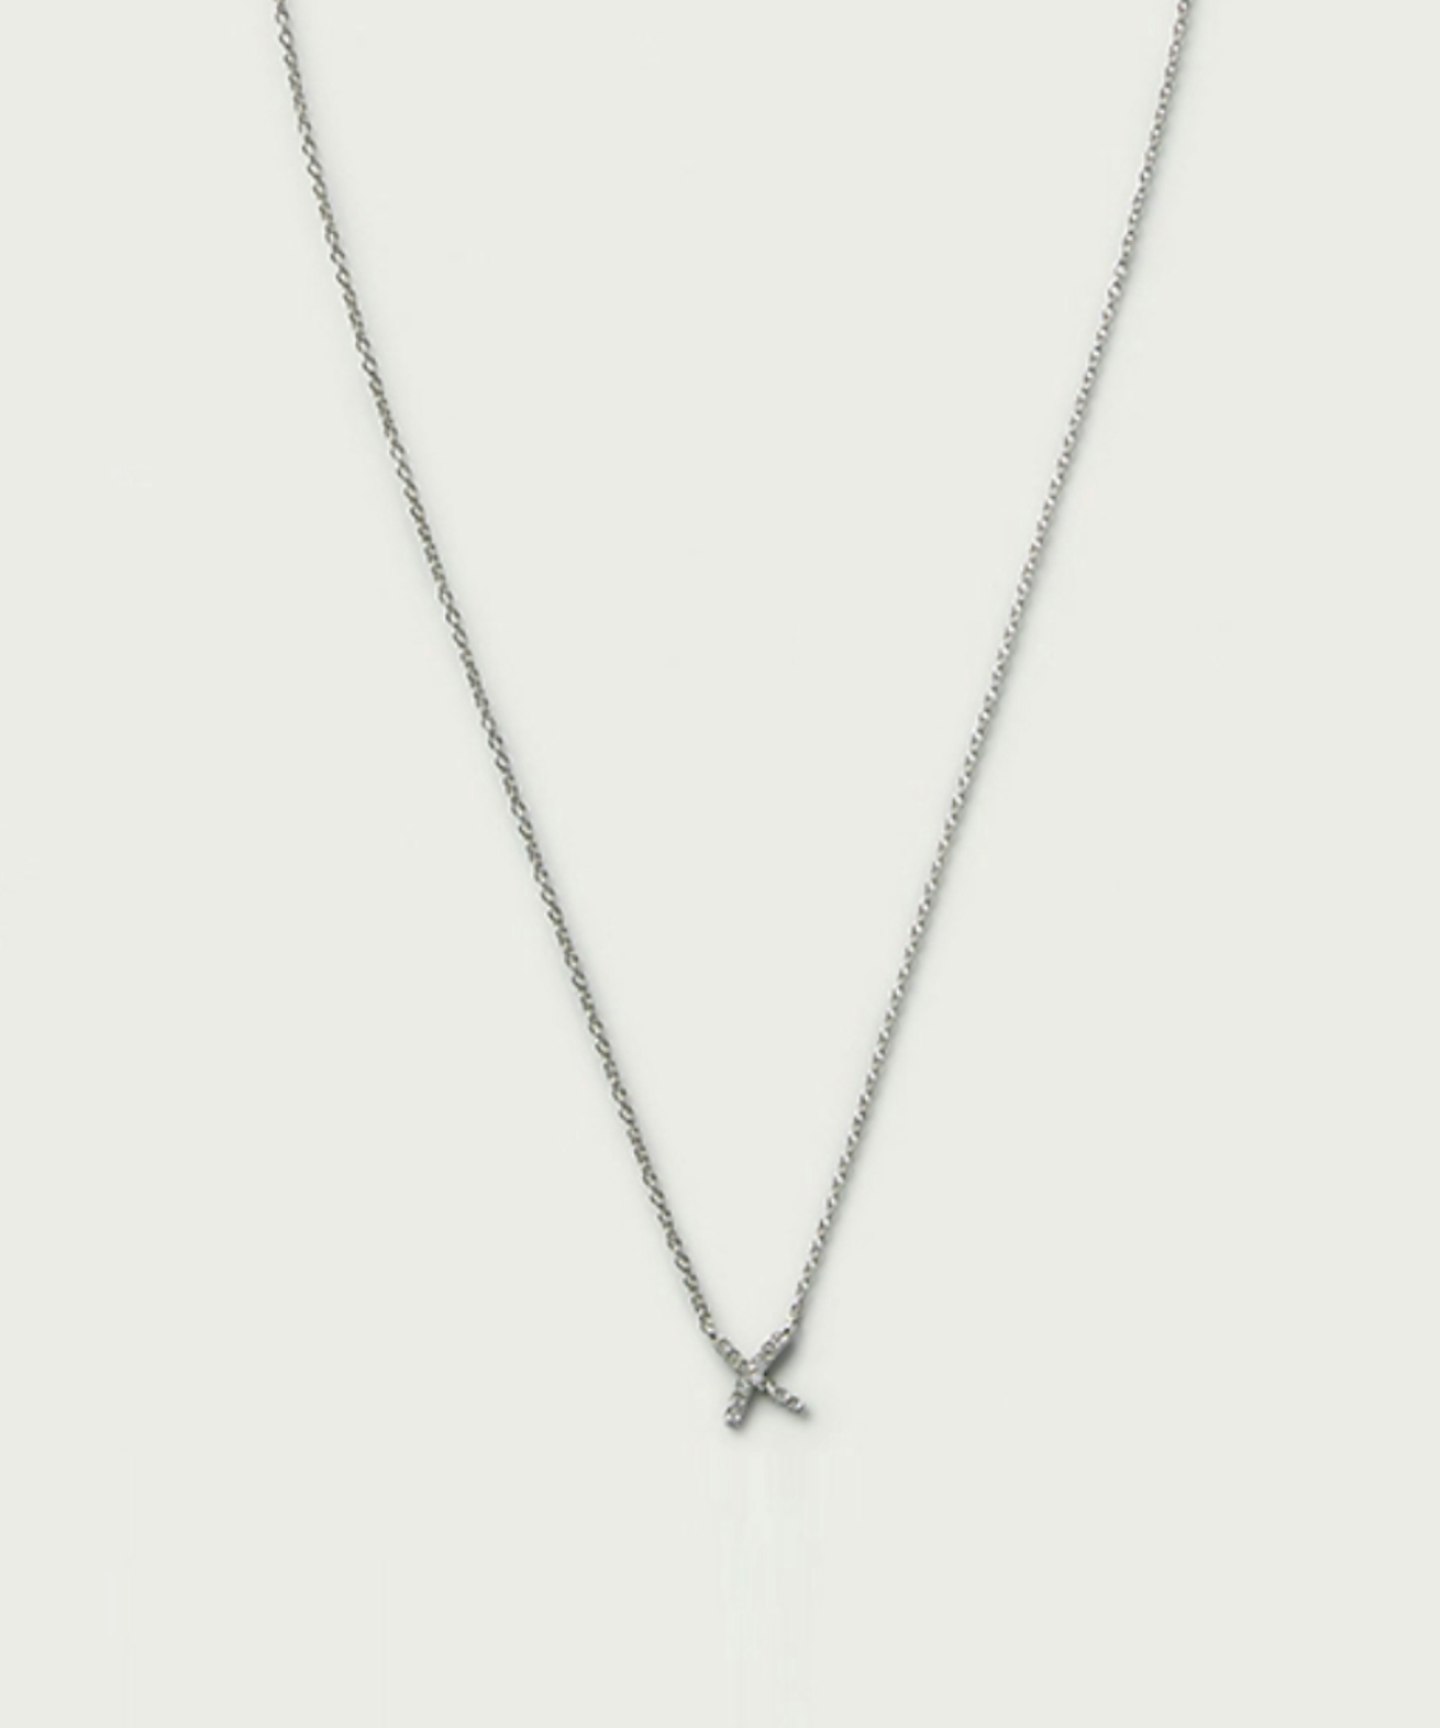 International Women's Day gifts The White Company, A Tiny Kiss Necklace (Donation to: #ChangeAGirlsLife Campaign)